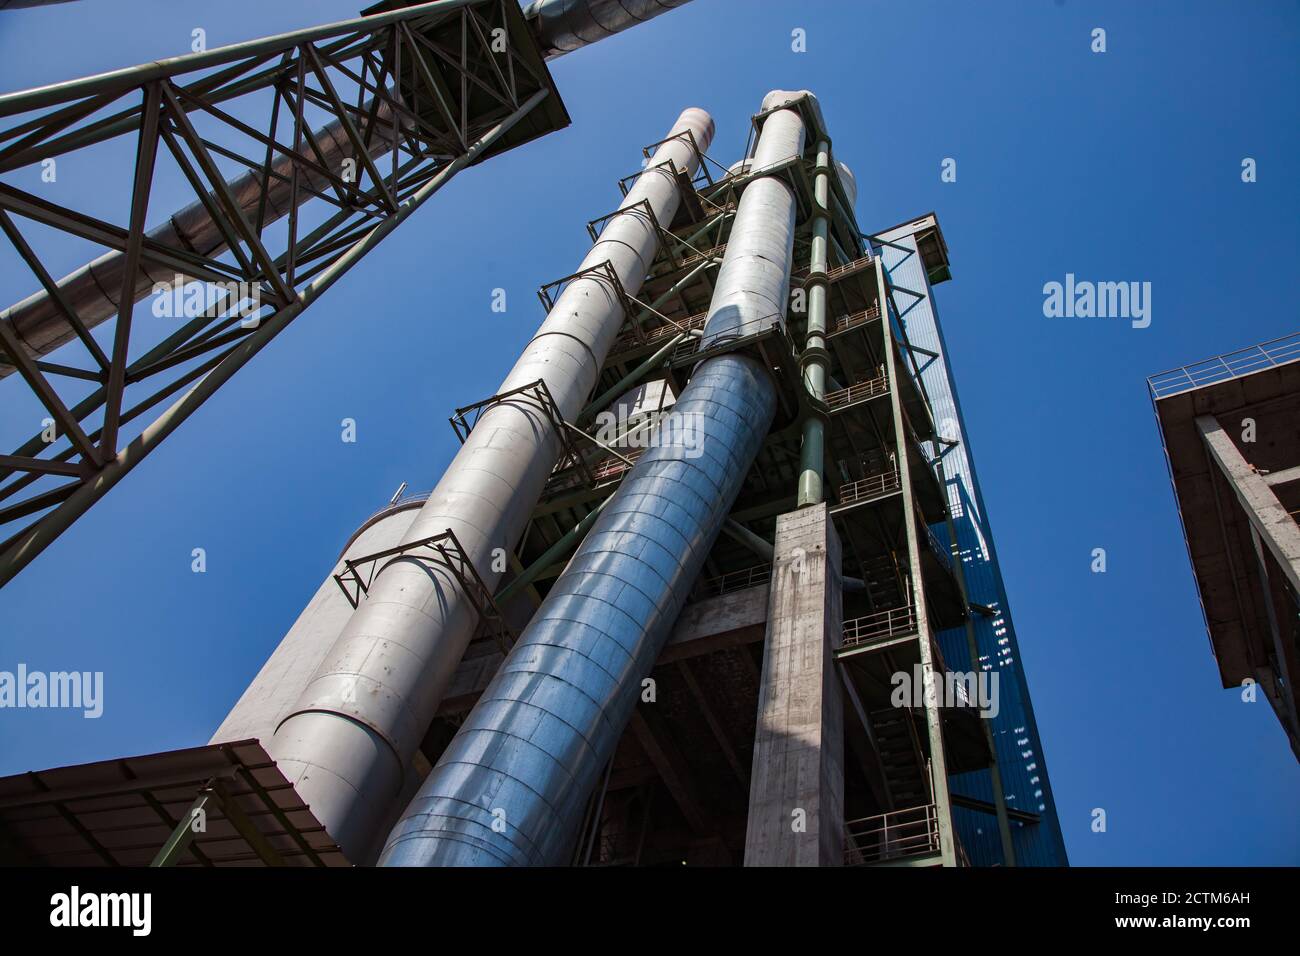 Mynaral/Kazakhstan - April 23 2012: Modern Jambyl Cement plant. The silo and pipes on clear blue sky. Wide-angle lens view. Stock Photo